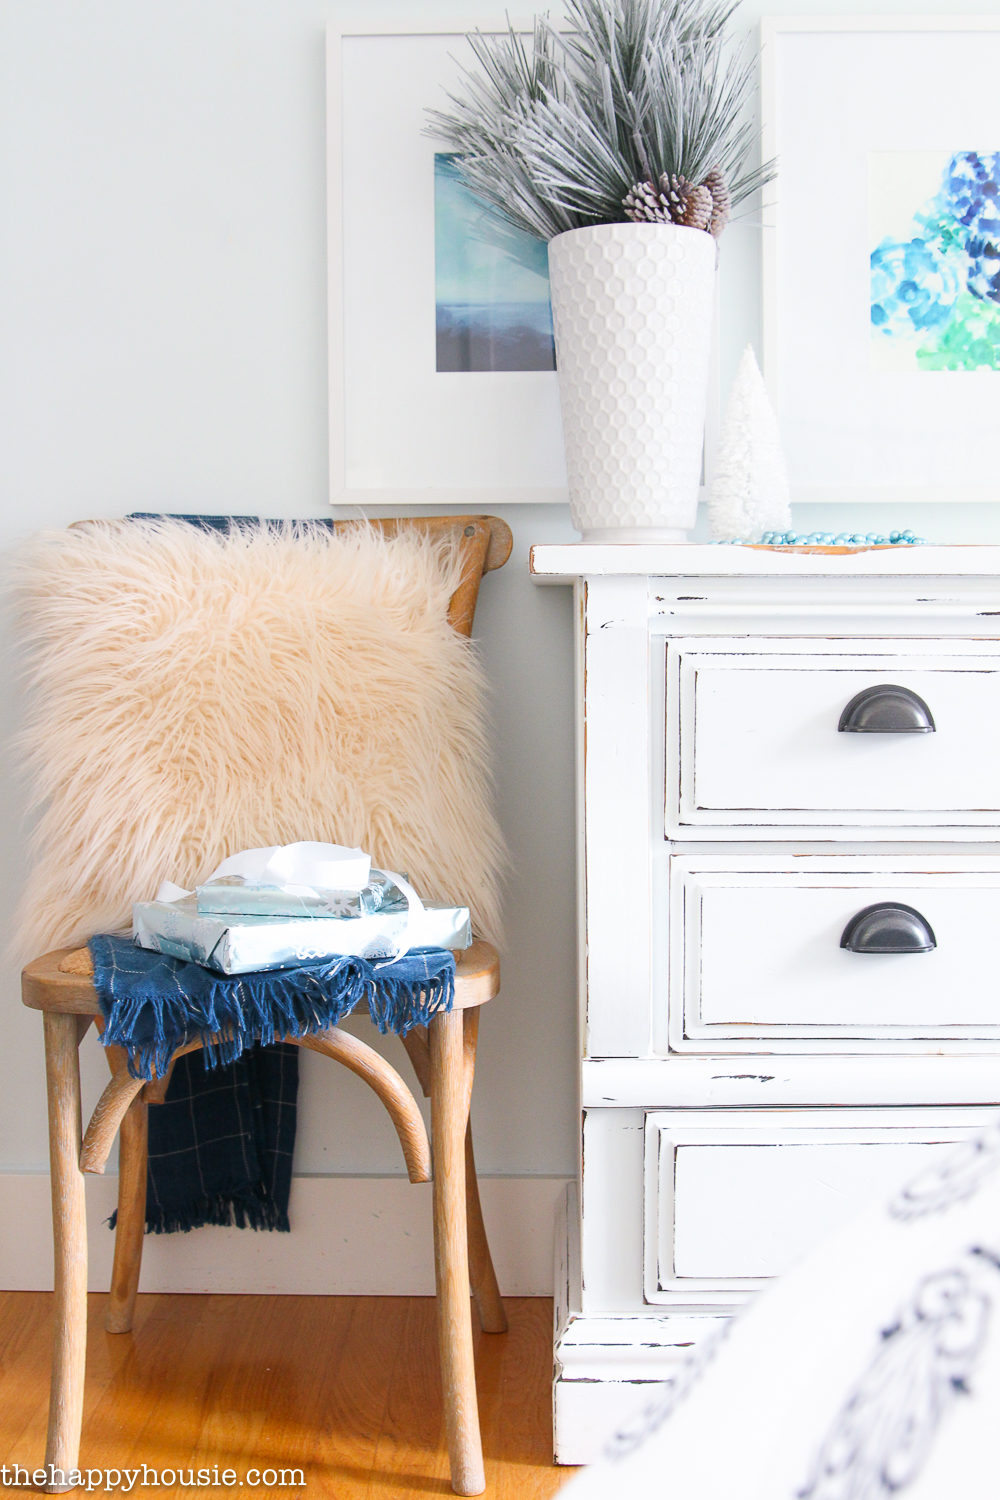 A small wooden chair has a fluffy faux fur pillow on it.